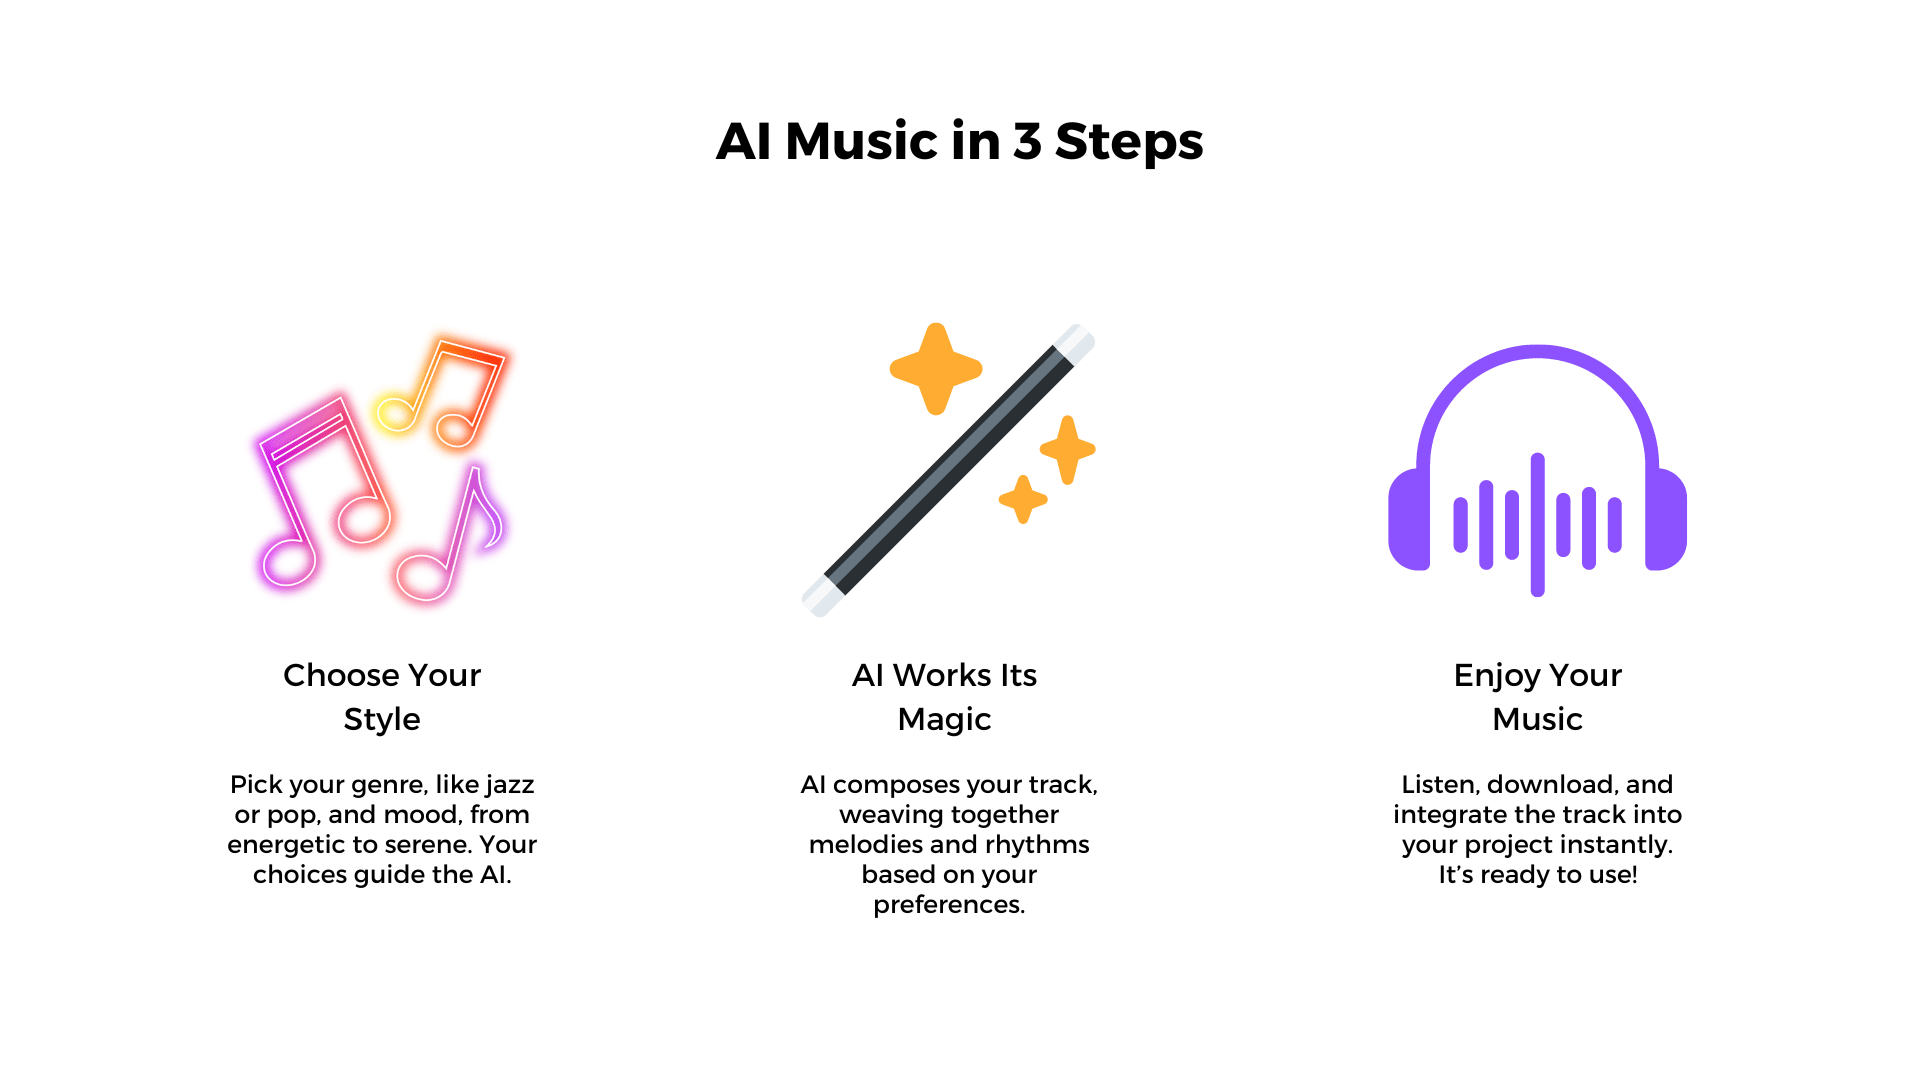 AI music generation broken down into 3 steps: choose your genre/mood, let the ai do the work, and enjoy your music